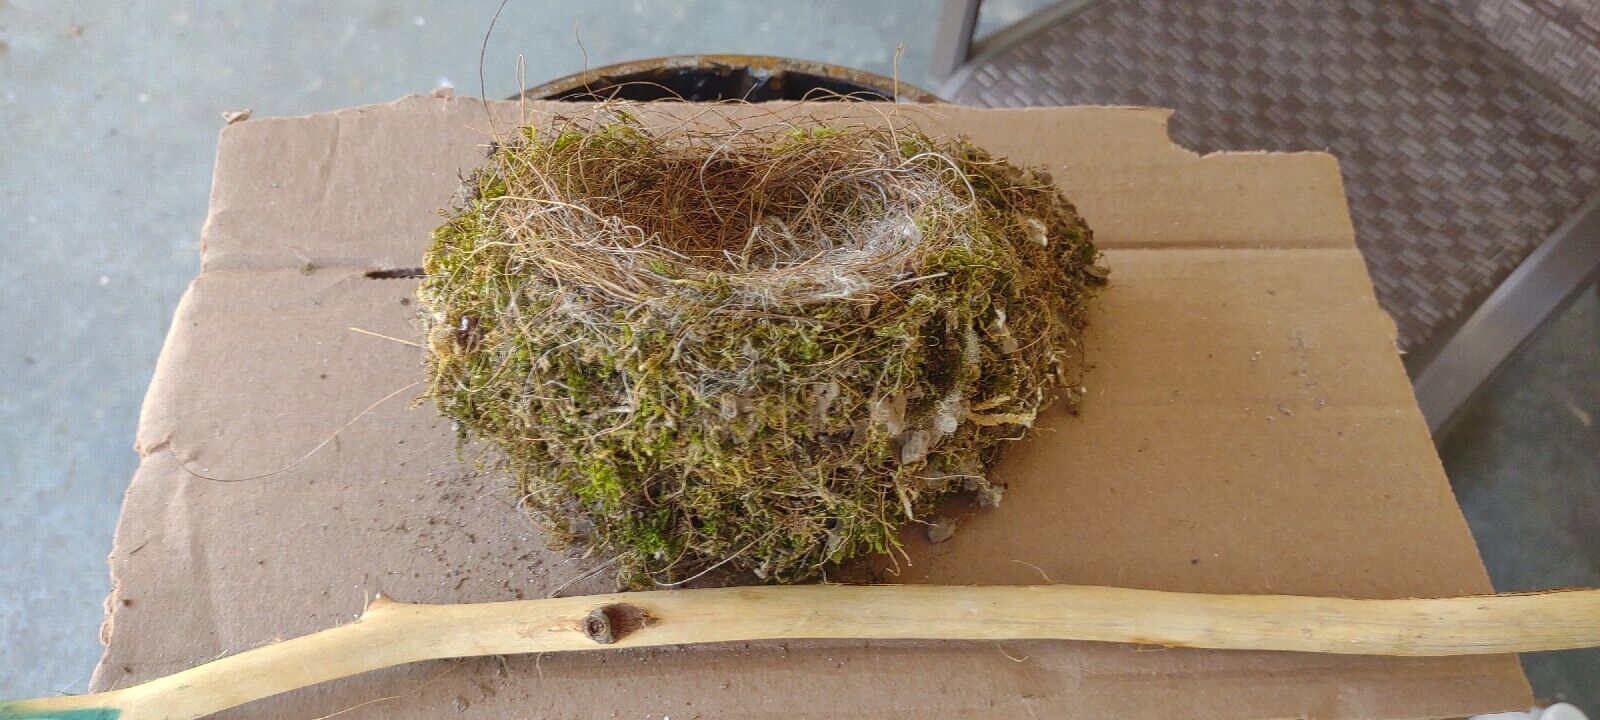 REAL NATURAL BIRD NEST  SOUTH JUST ABANDONED IN TENNESSEE STRAW MOSS